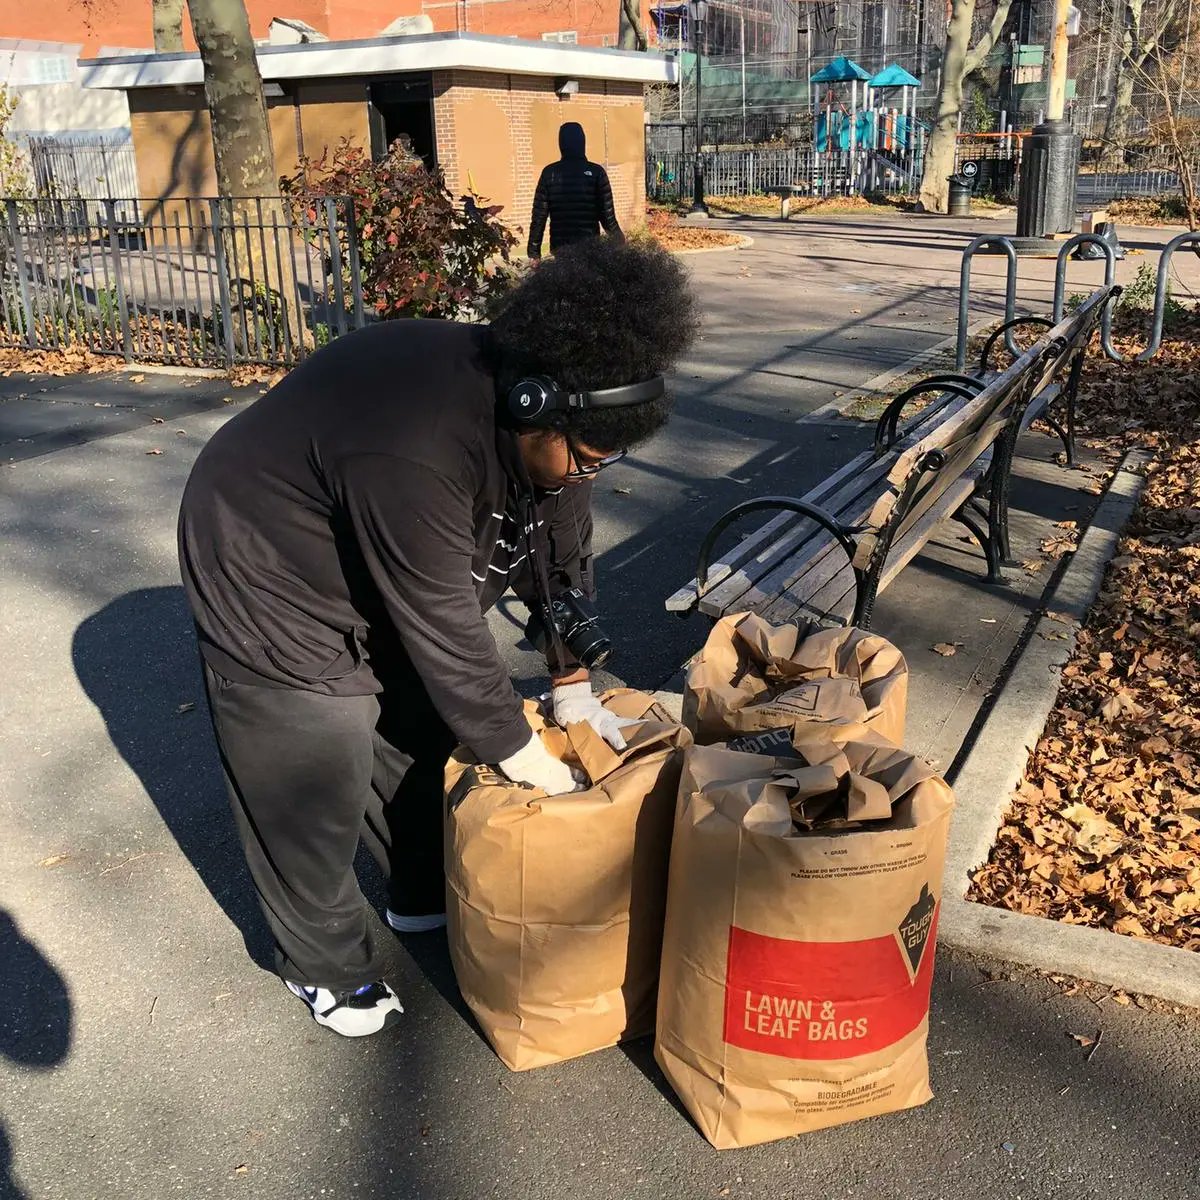 Our #excellentleaders and members of MBK giving back to the community at the Bushwick Playground. They assisted with the clean up and helped make Bushwick a cleaner, healthier, and safer place to enjoy. 🍃 🍂